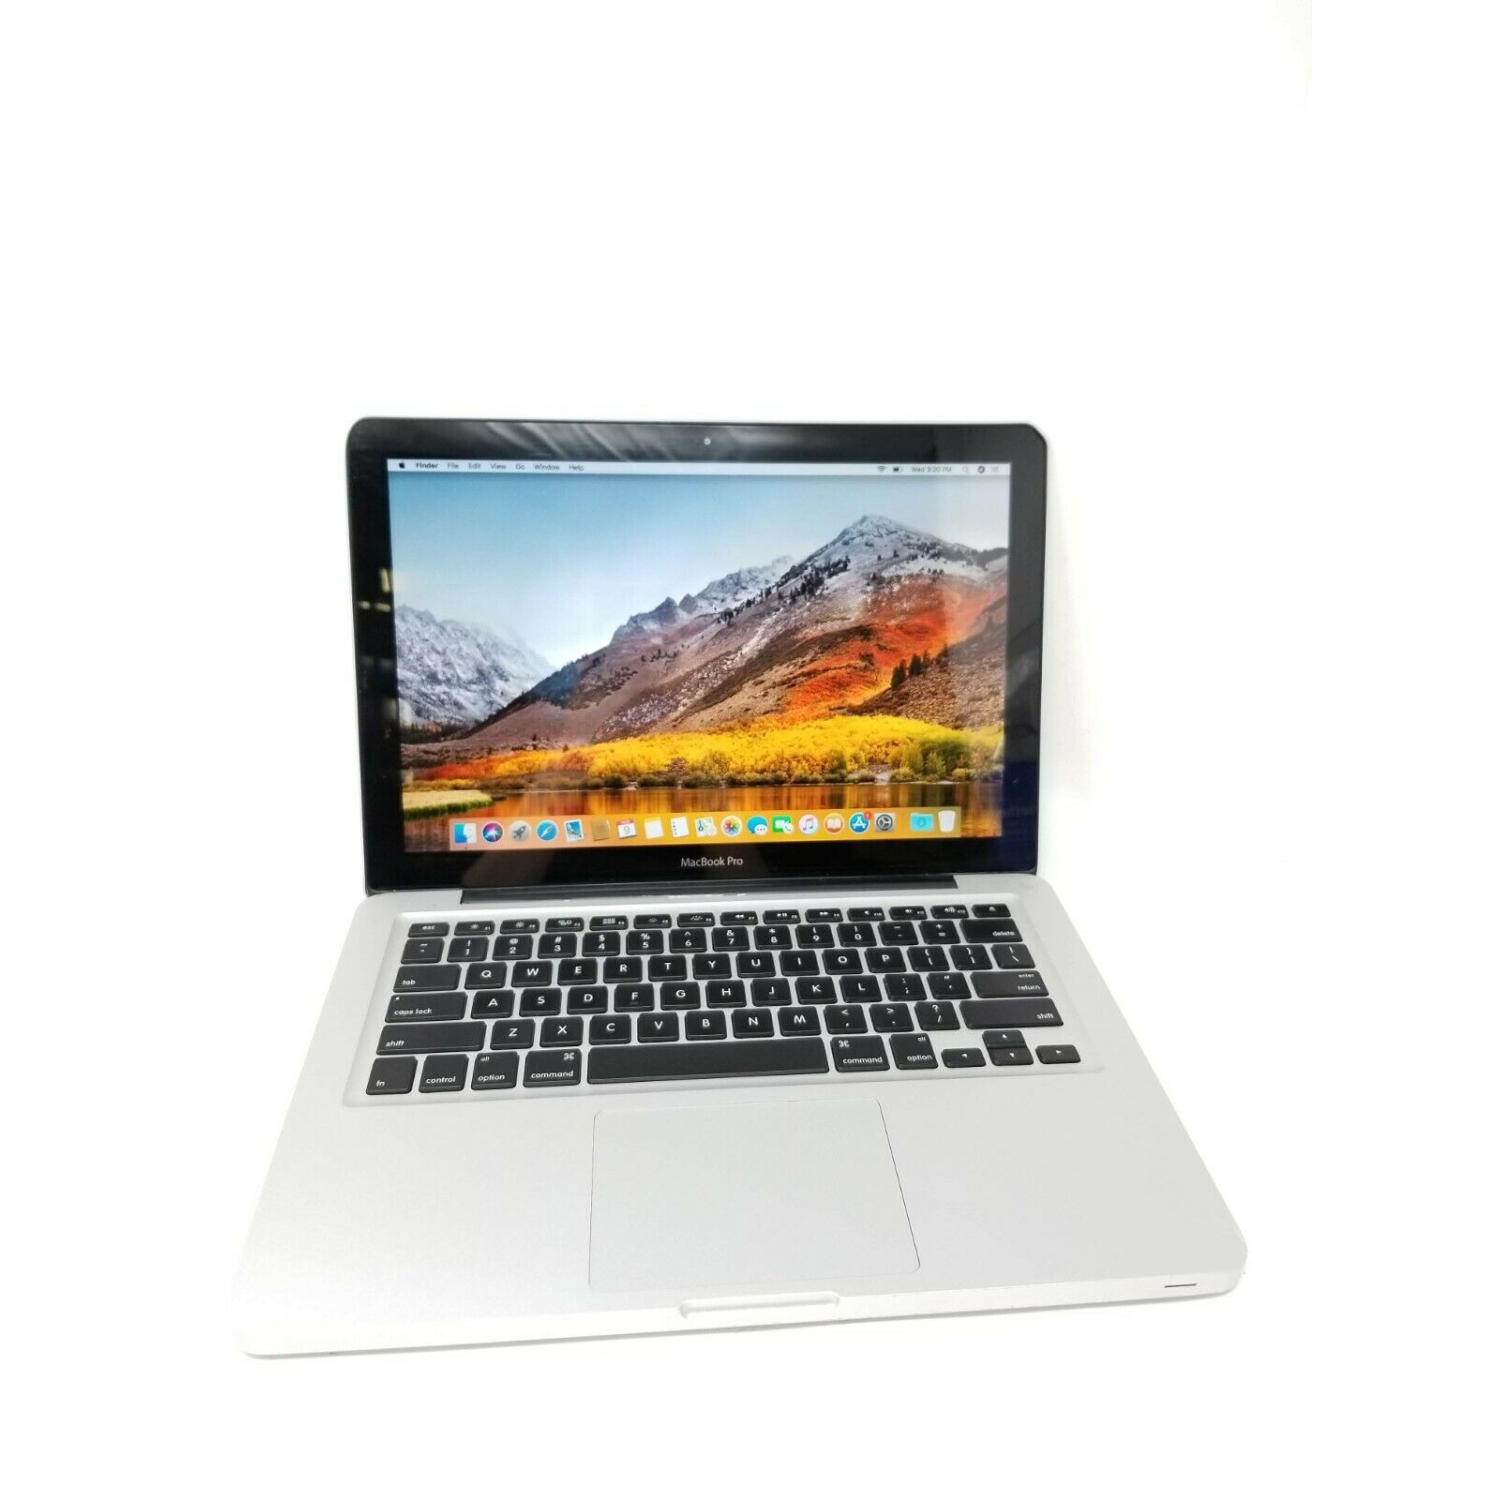 Refurbished (Excellent) - Apple MacBook Pro A1278 (2012) 13.3'' i5 8GB 256G SSD DVD/RW OS High Sierra 10.13 with Free LIXSUNTEKÃ‚Â® ethernet cable